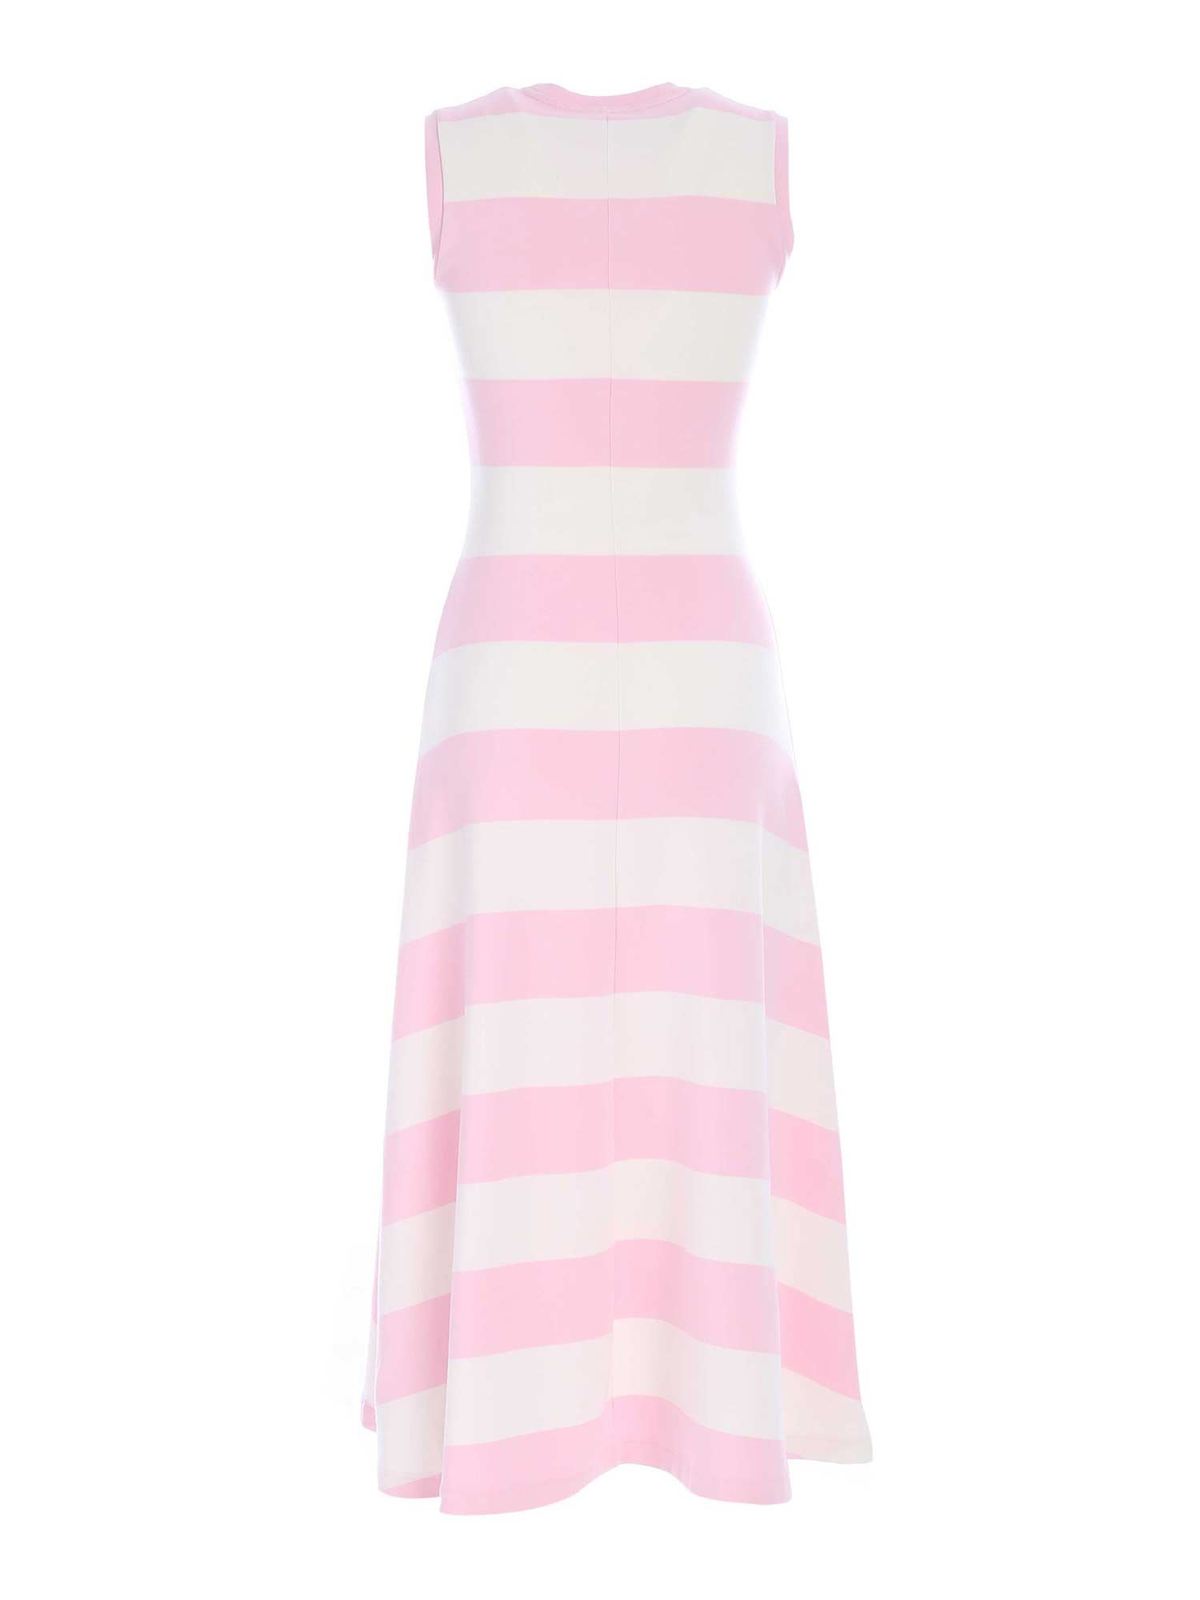 Maxi dresses Polo Ralph Lauren - Striped dress in pink and white -  211838121001